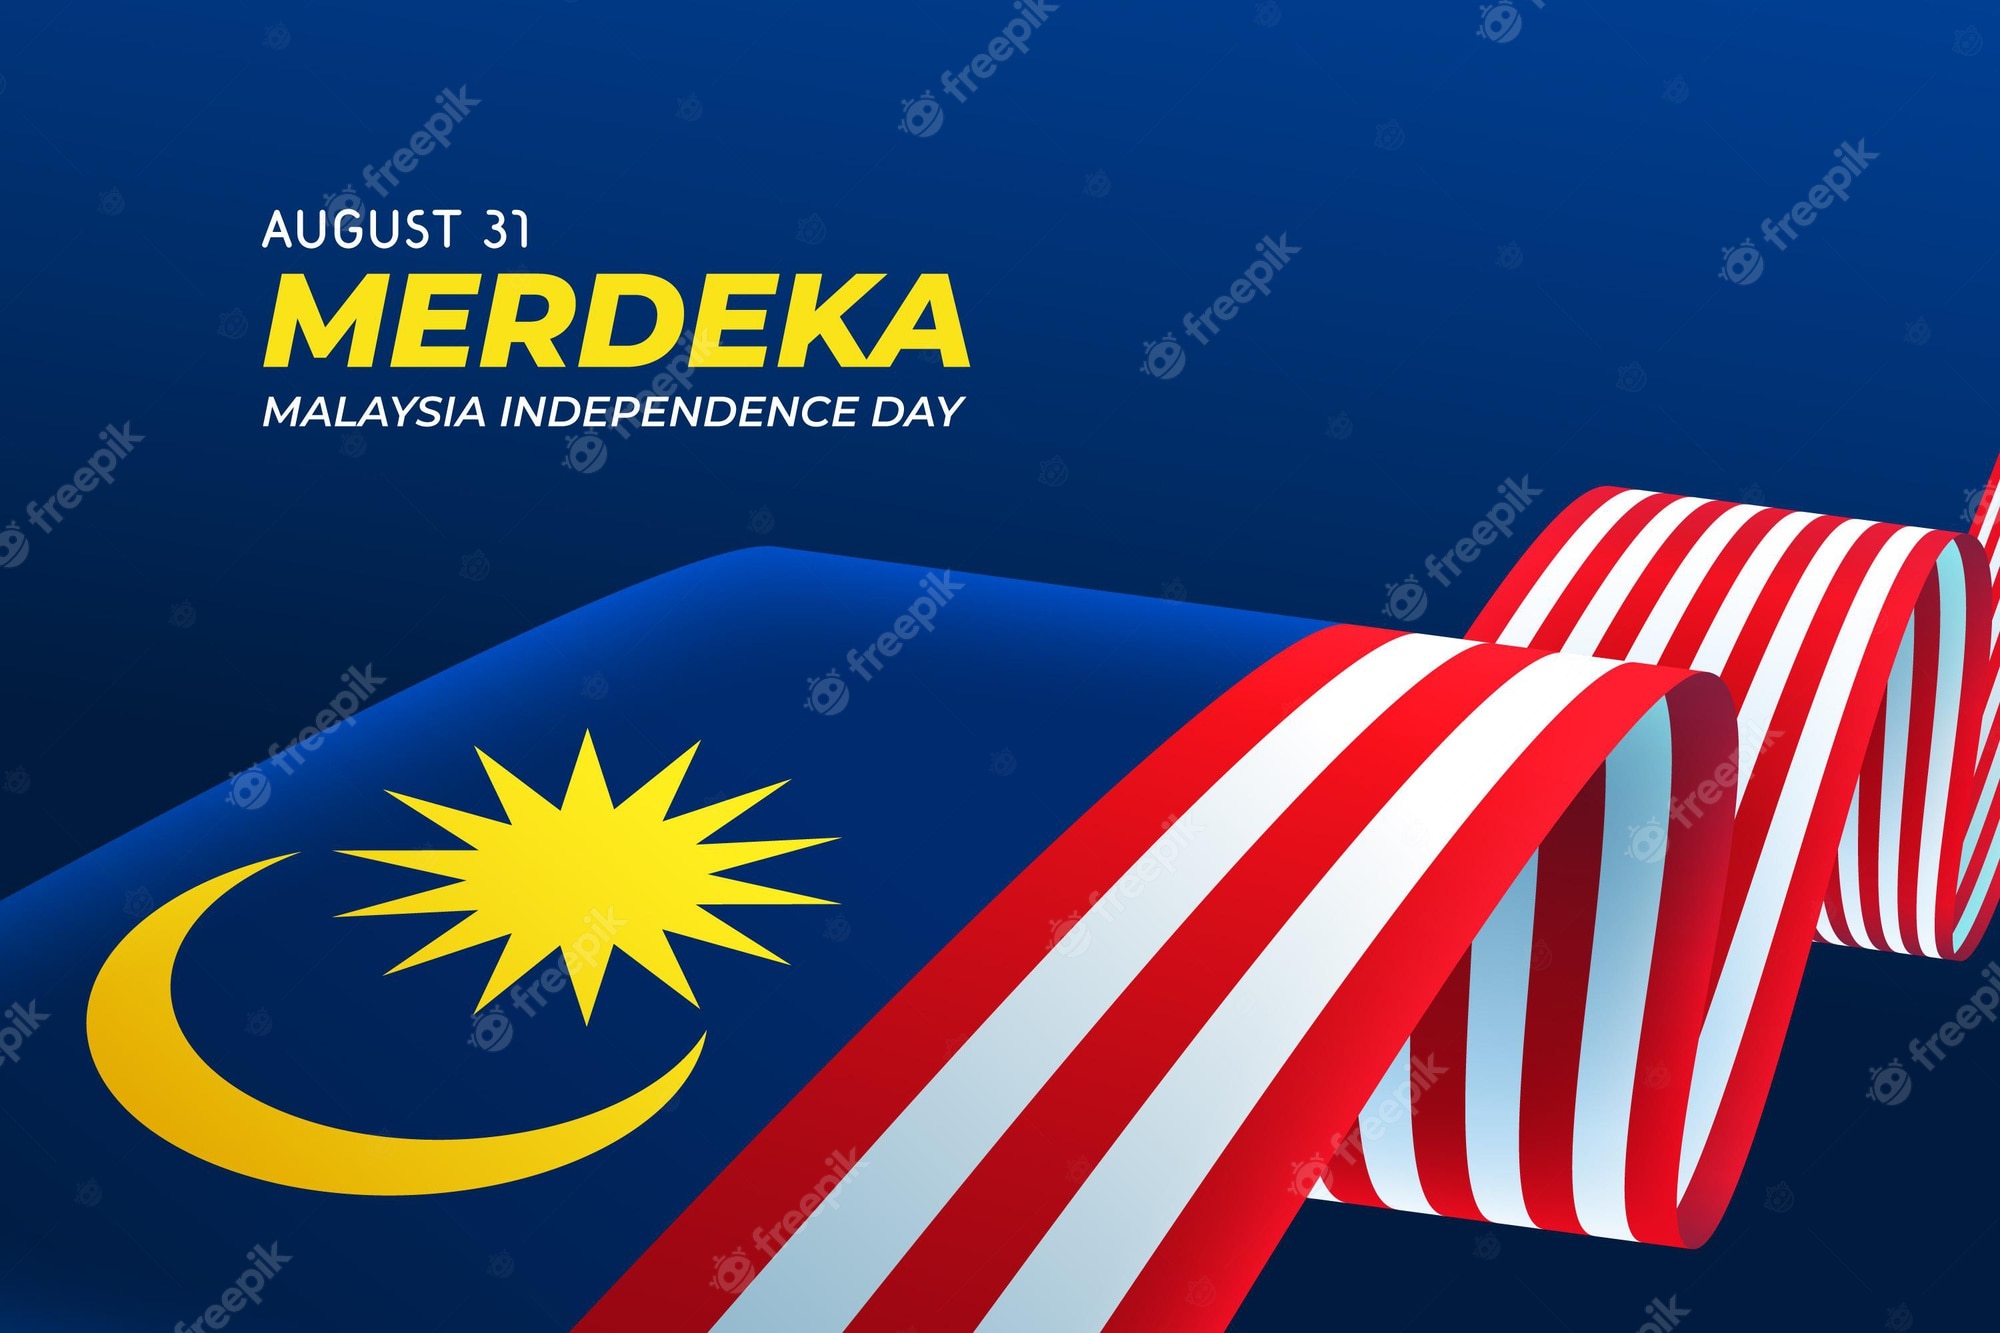 Free vector merdeka malaysia independence day